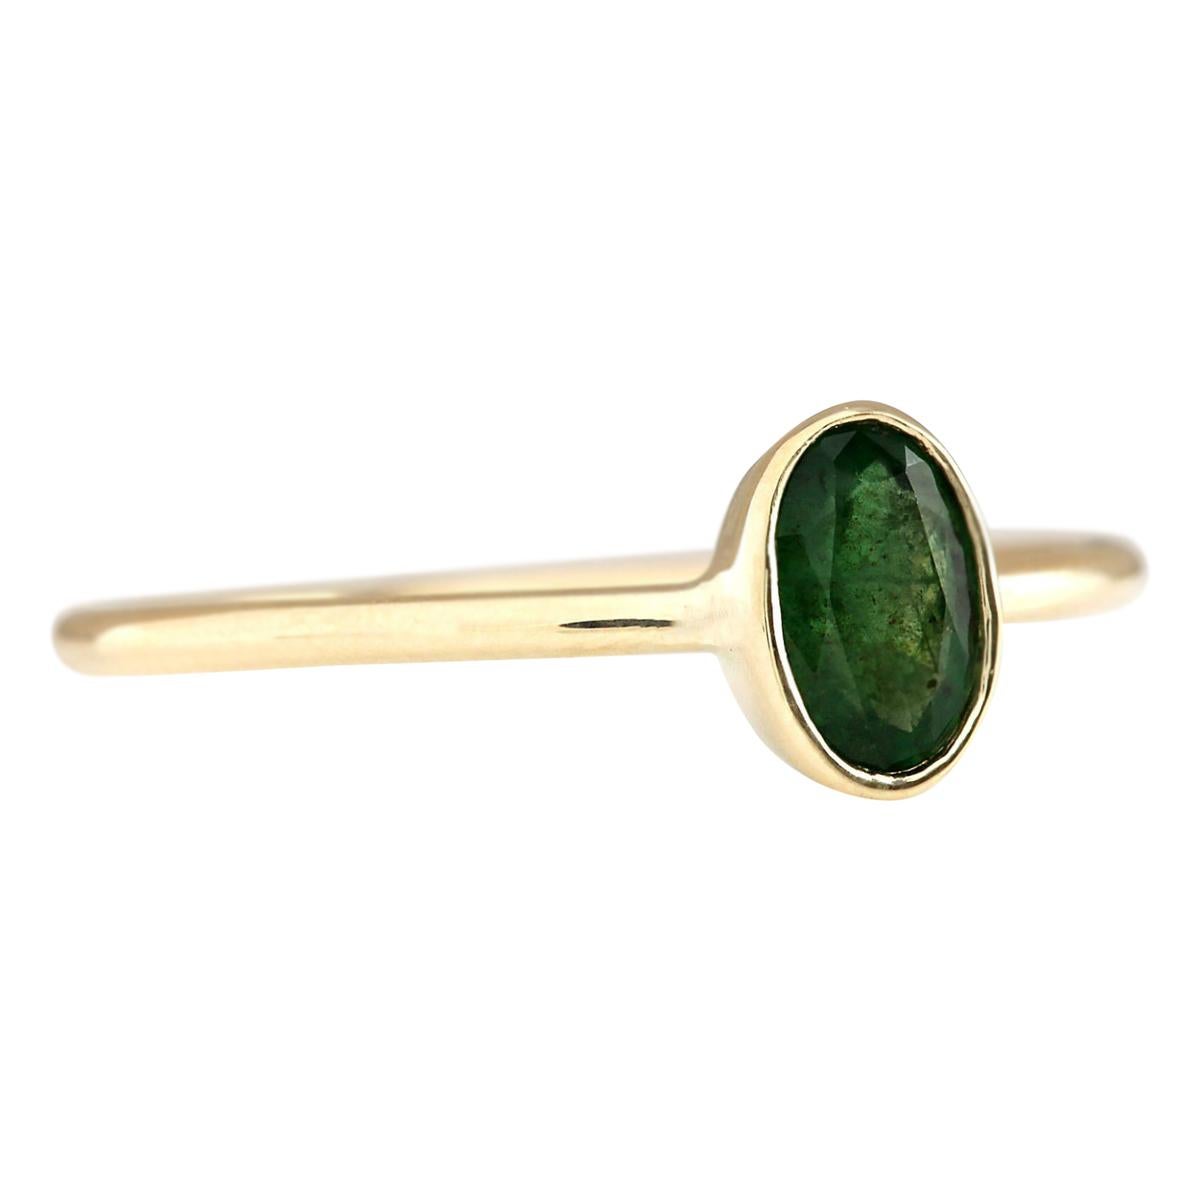 Stamped: 14K Yellow Gold
Total Ring Weight: 1.2 Grams
Total Natural Emerald Weight is 0.50 Carat
Color: Green
Face Measures: 6.00x4.00 mm
Sku: [703377W]